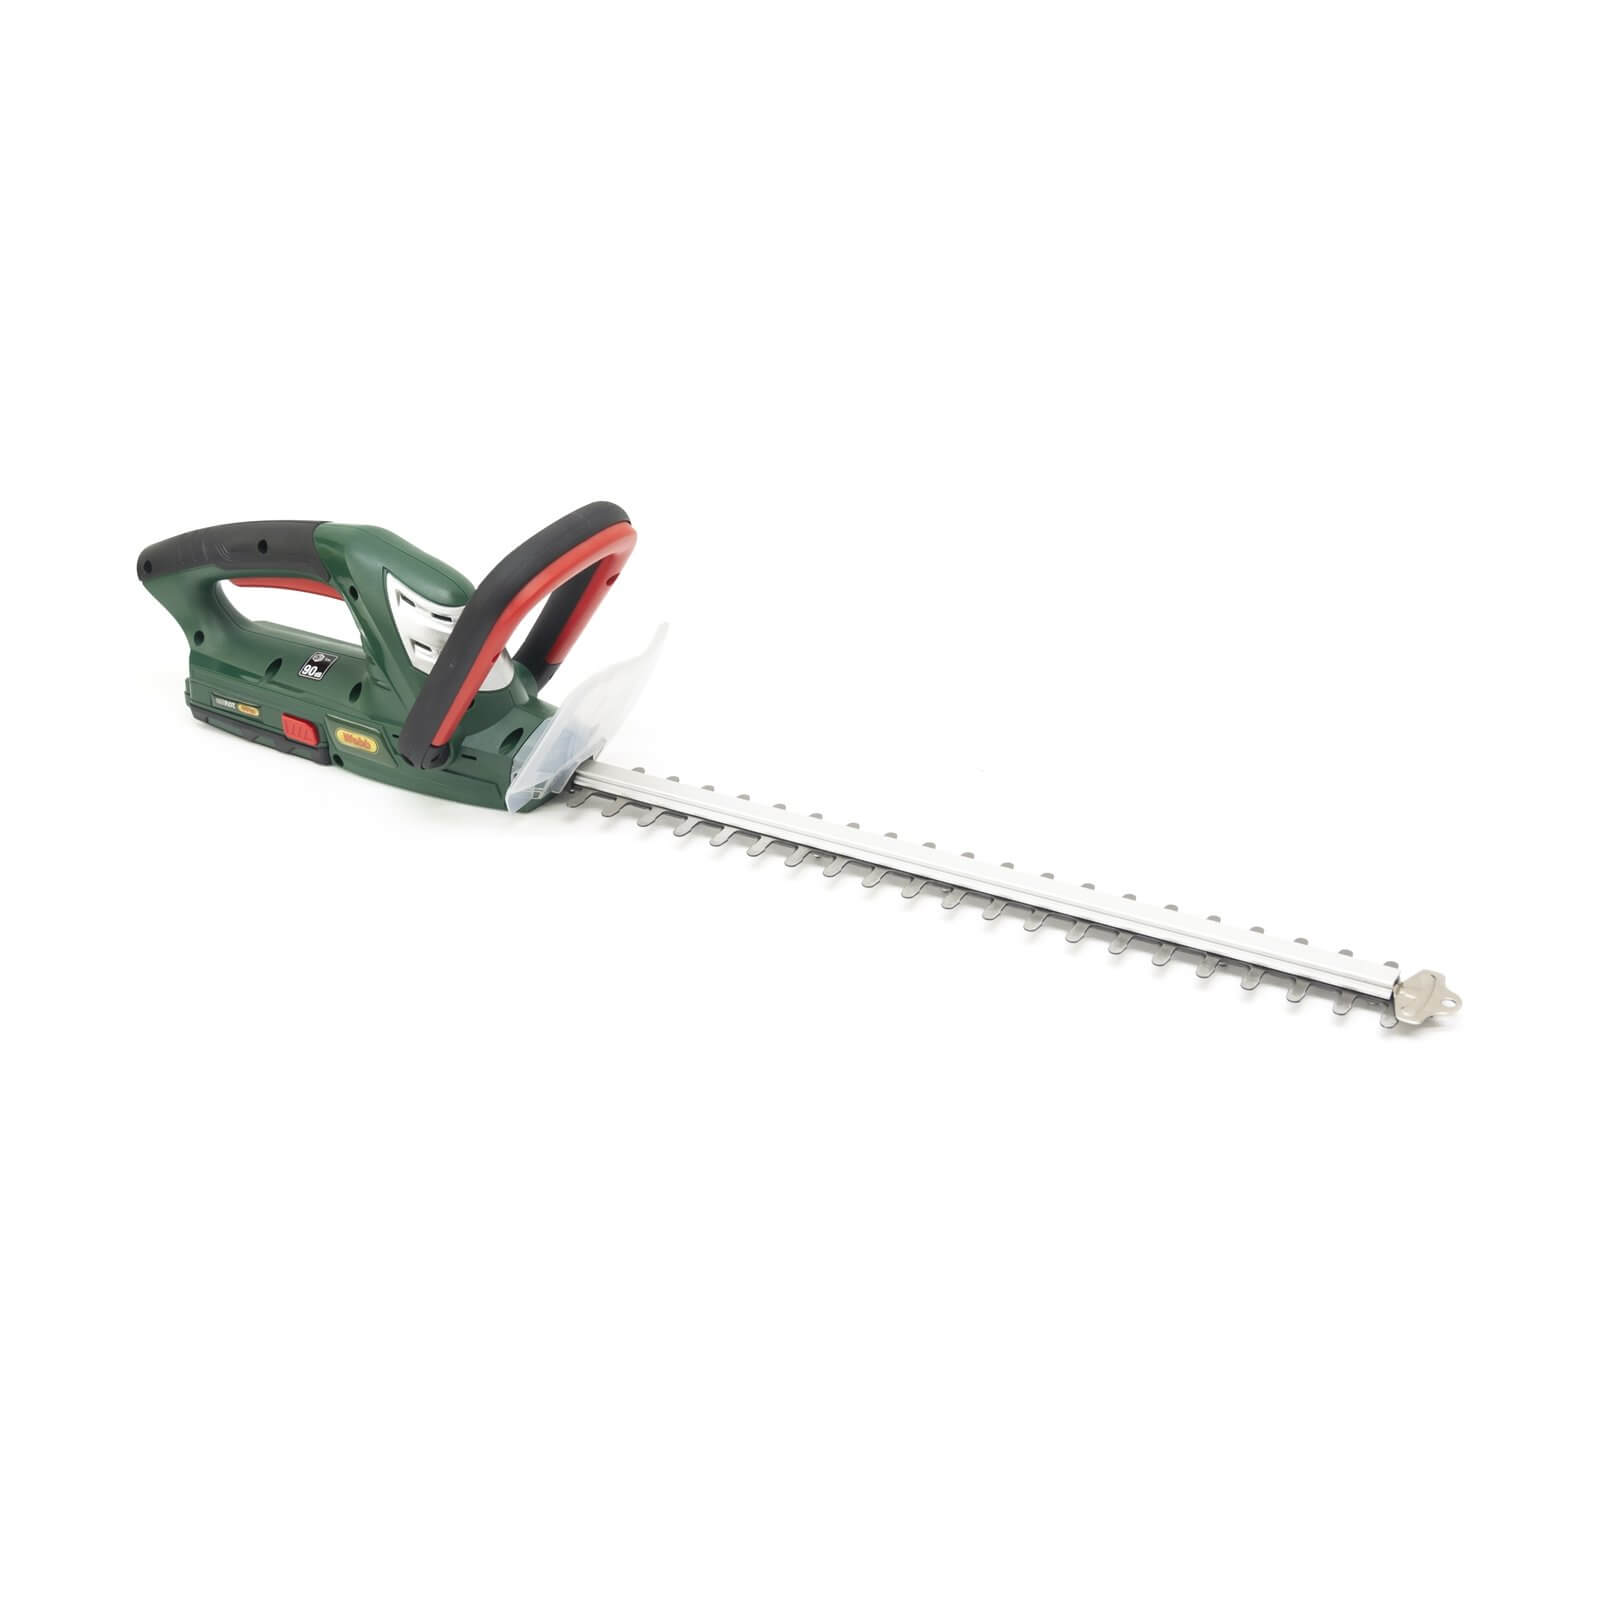 Webb 20V Hedgetrimmer With Battery Charger